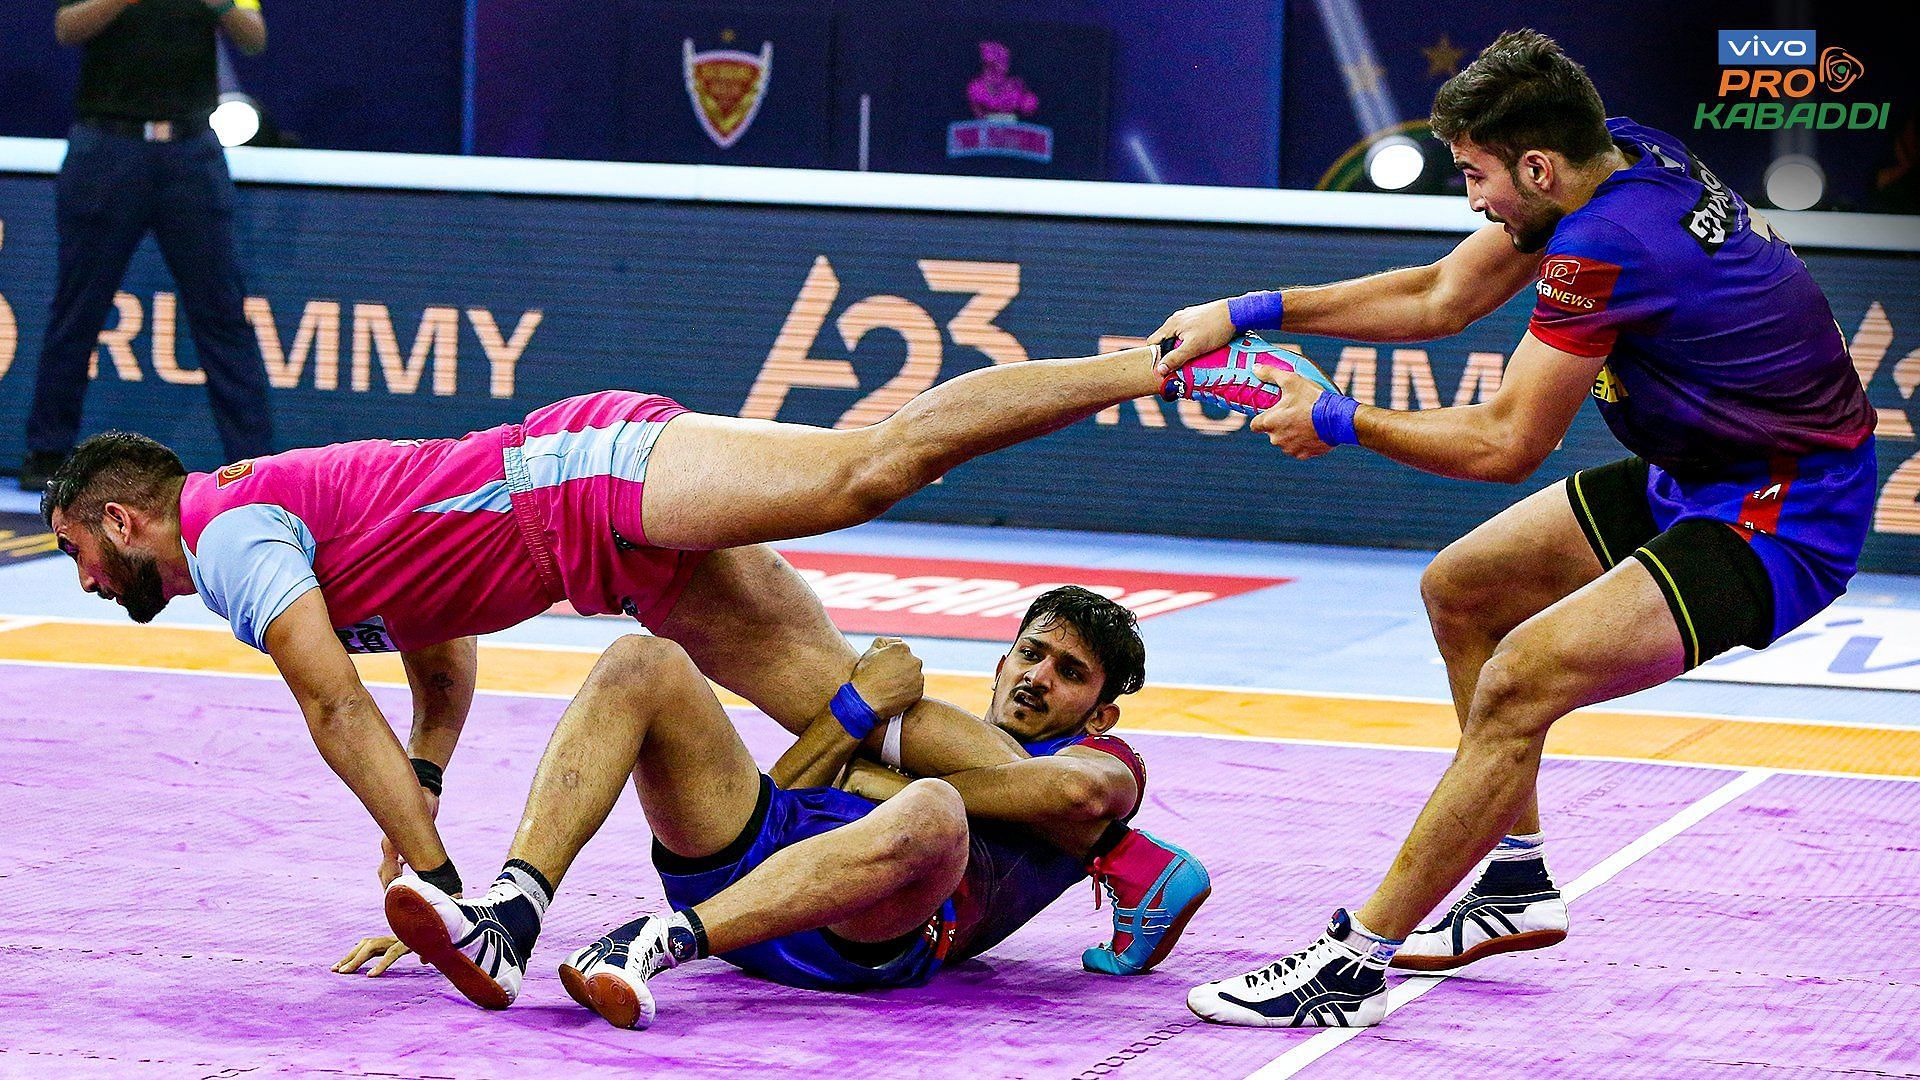 The Showman Rahul Chaudhari was in action earlier tonight in Pune (Image: PKL)